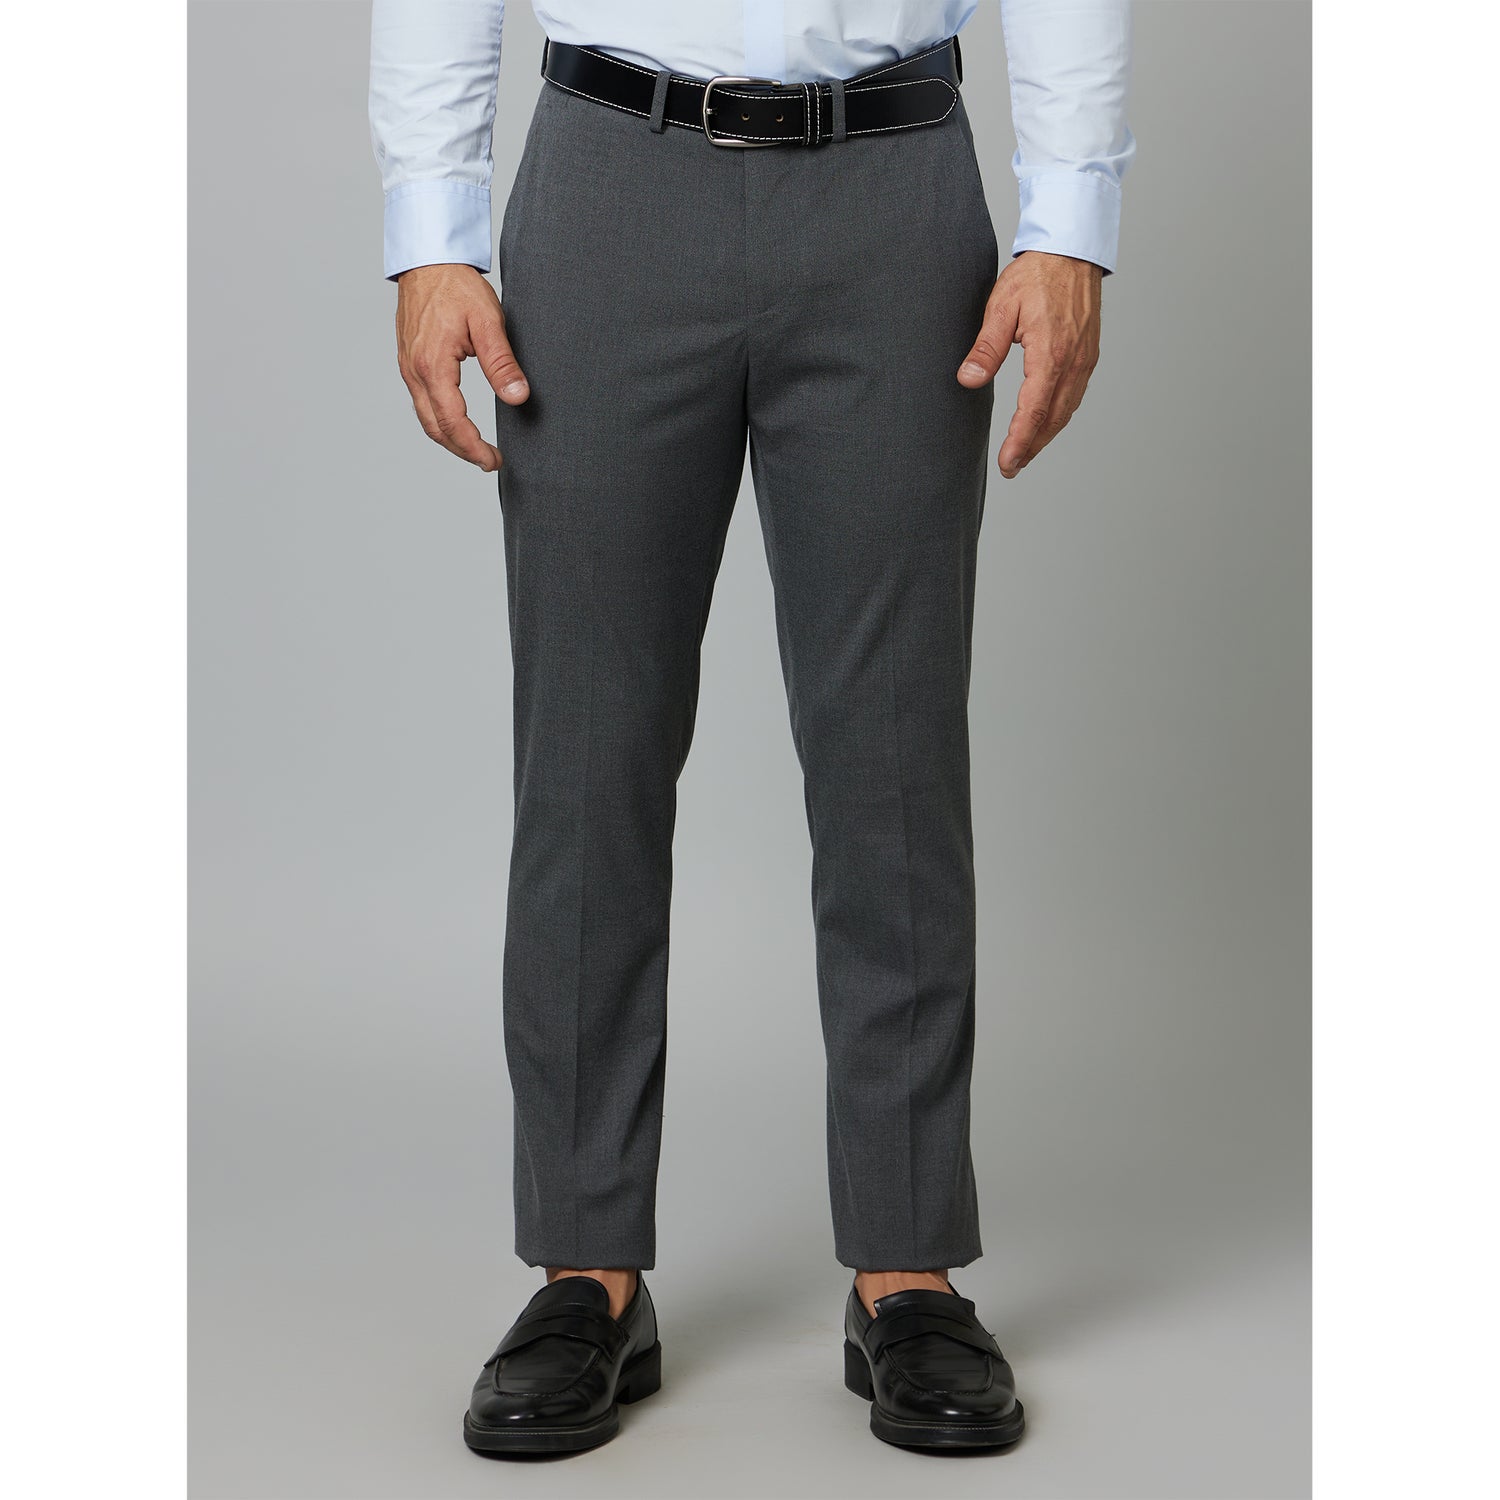 Grey Colored Mid-Rise Slim Fit Formal Trousers (BOAMAURY1)